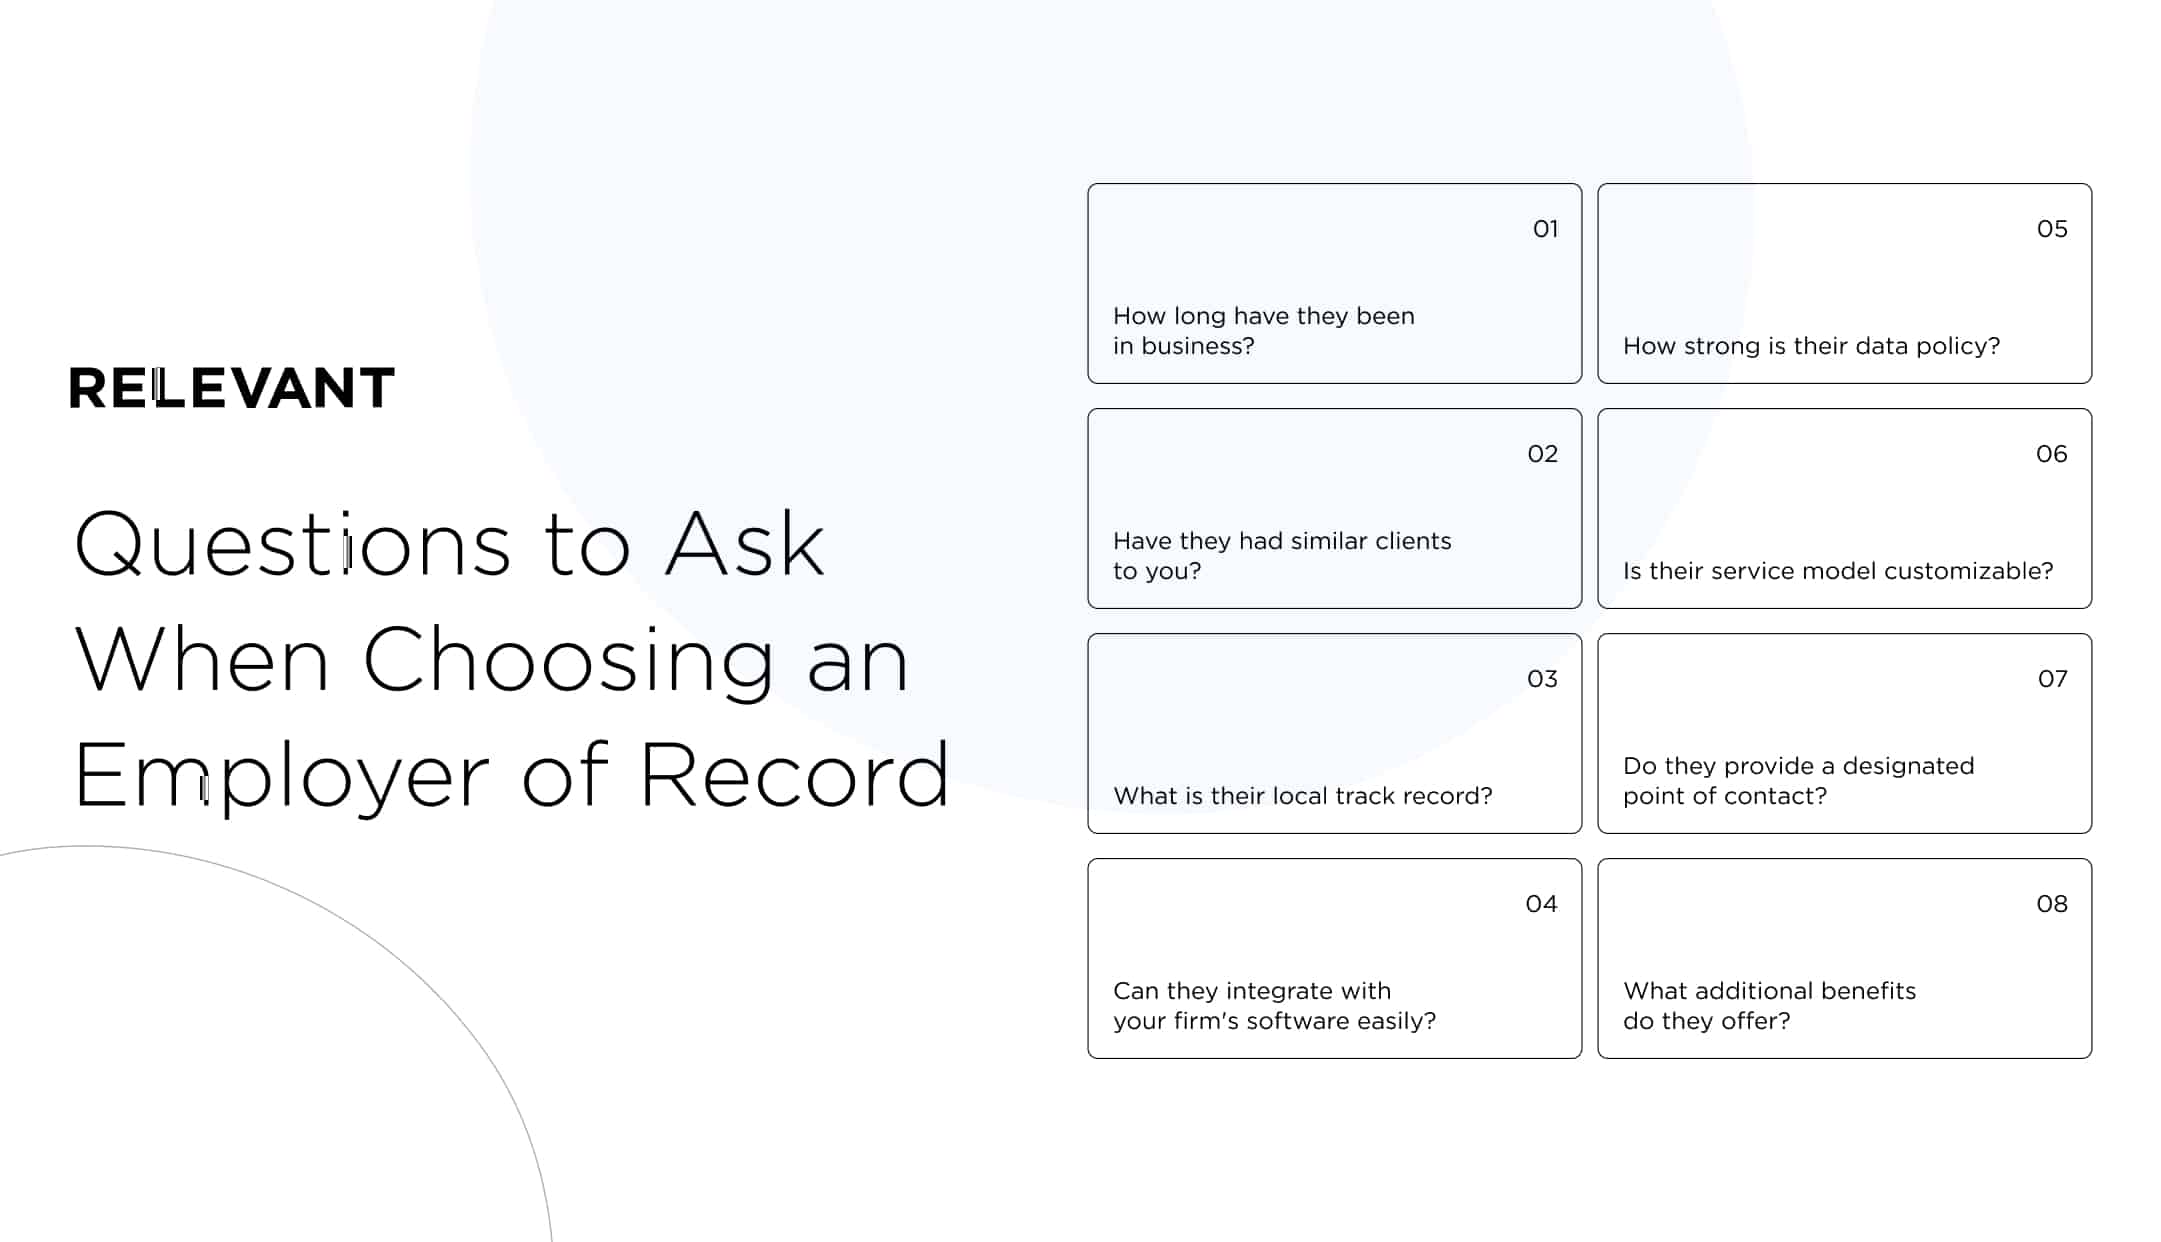 Questions to ask when choosing an employer of record